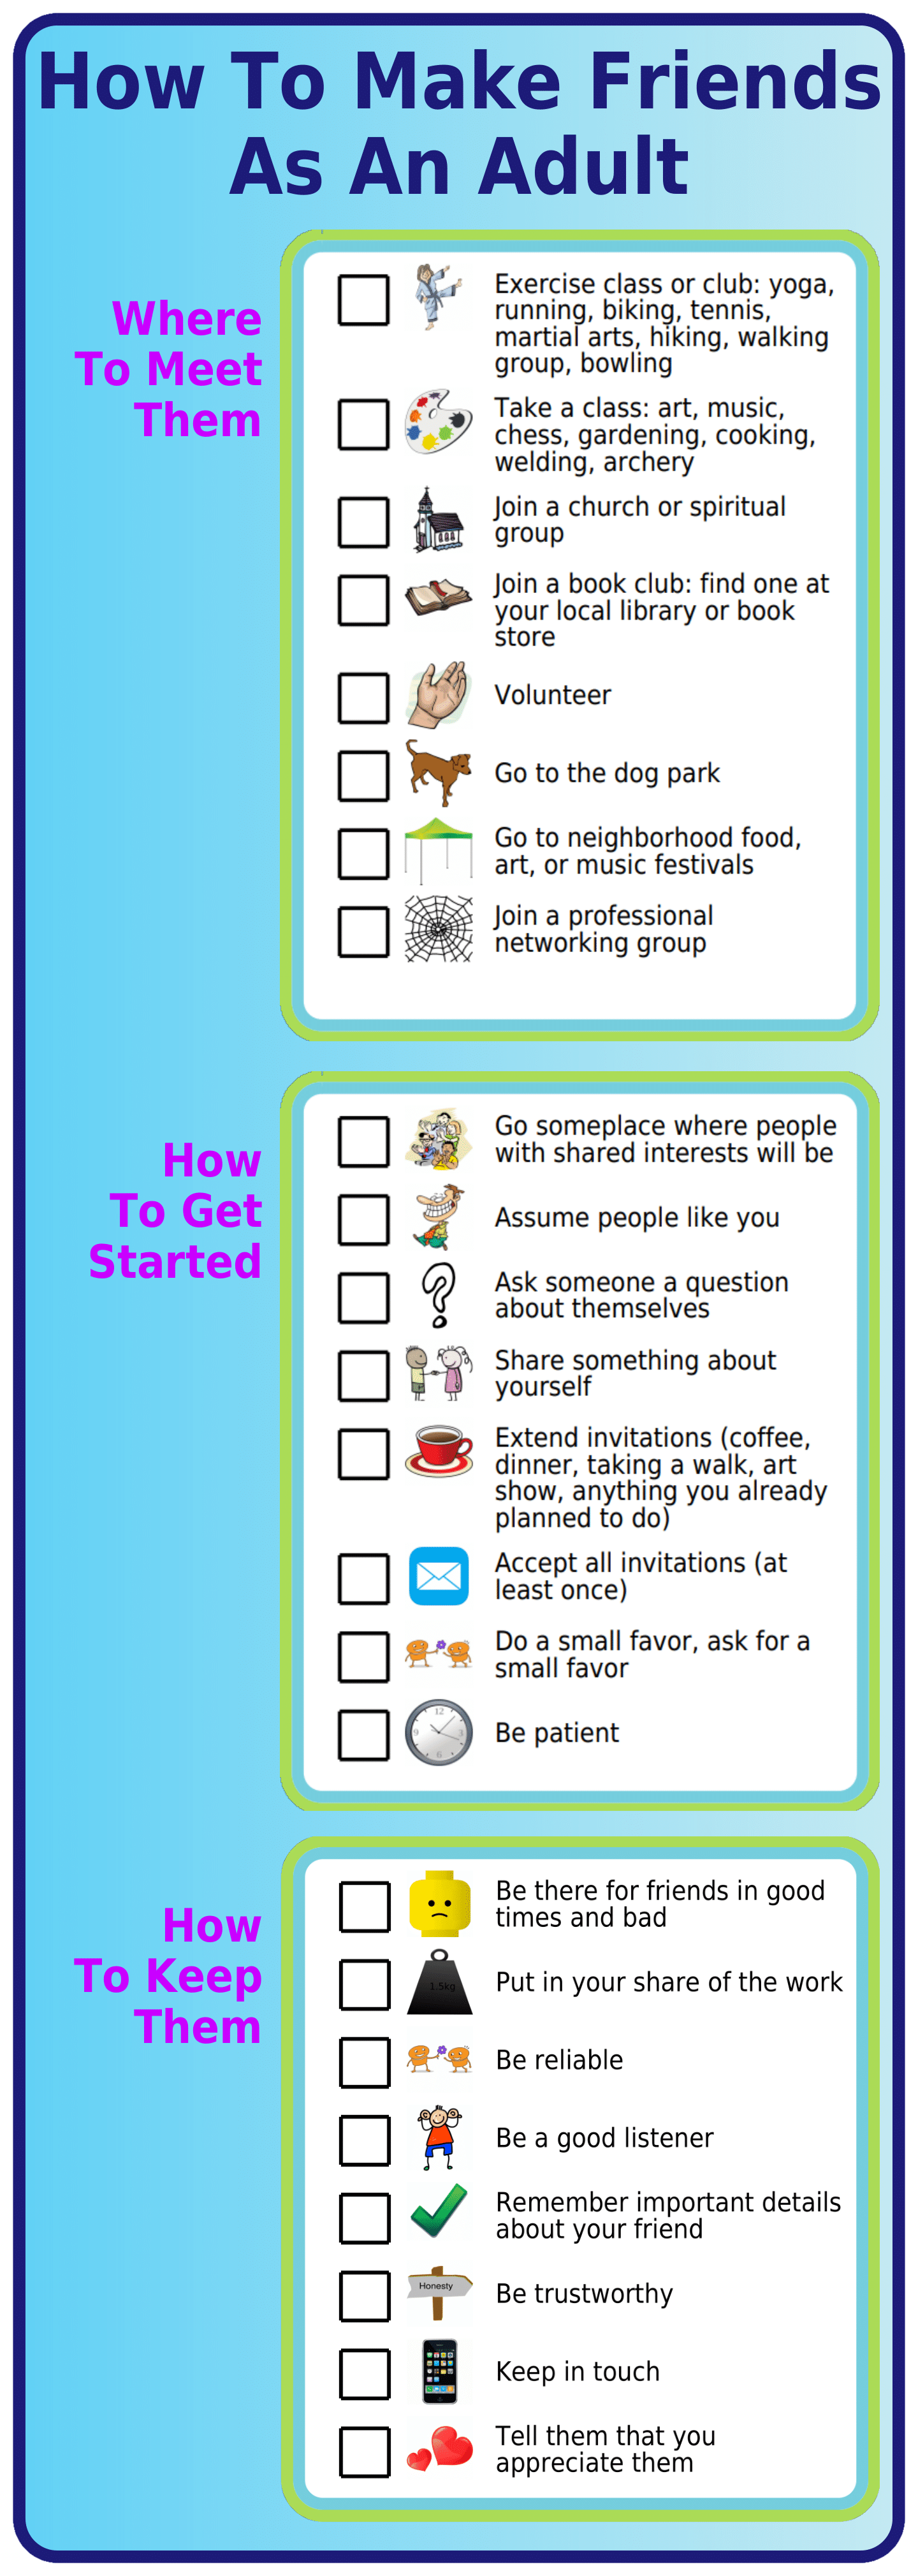 Picture checklists to teach about how to make friends - where to meet them, how to get started, how to keep them